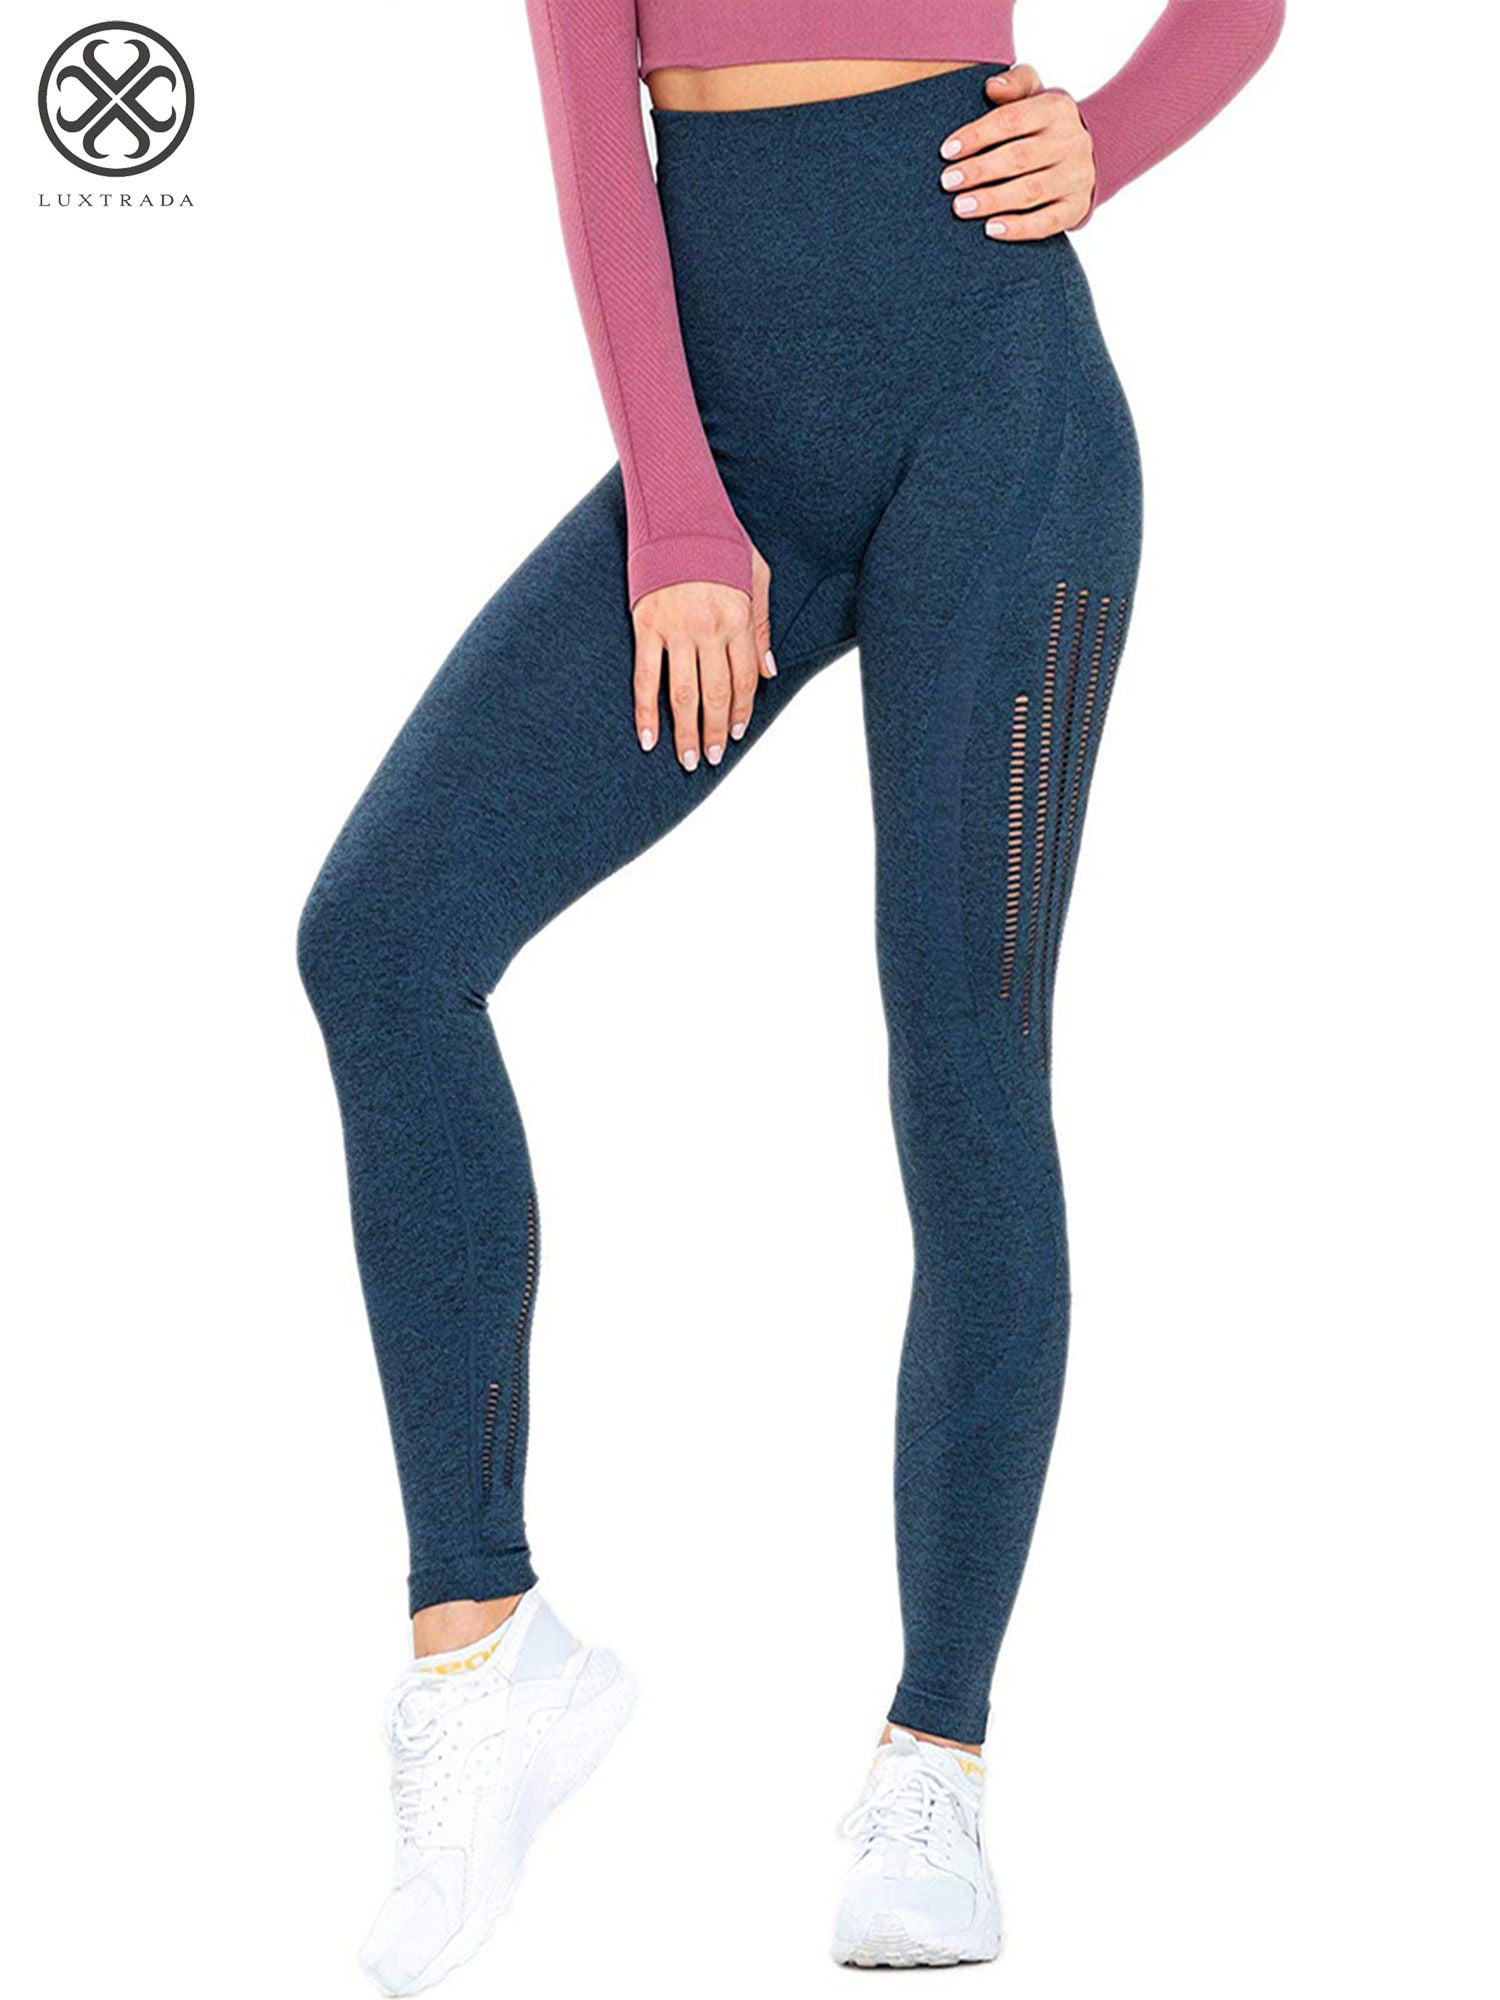 Women's High Waist Seamless Leggings Ankle Yoga Pants Squat Proof Workout Tight 